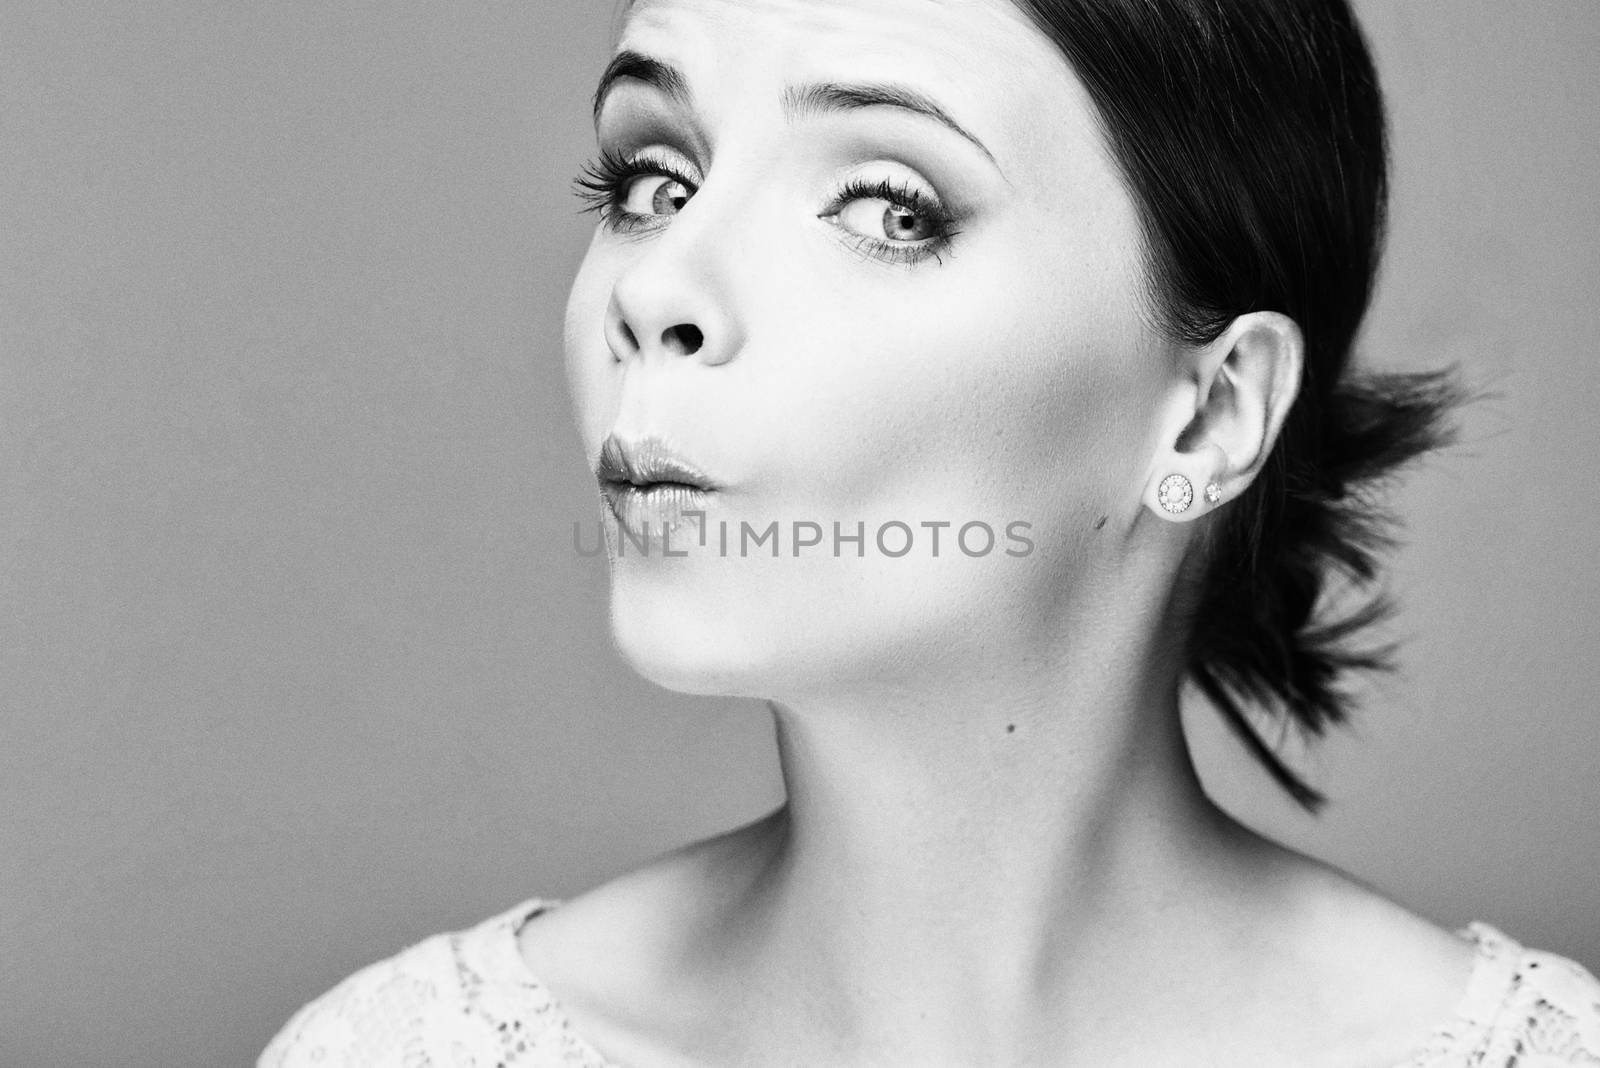 Black and white emotional portrait of a beautiful fashion girl, sweet and sensual.